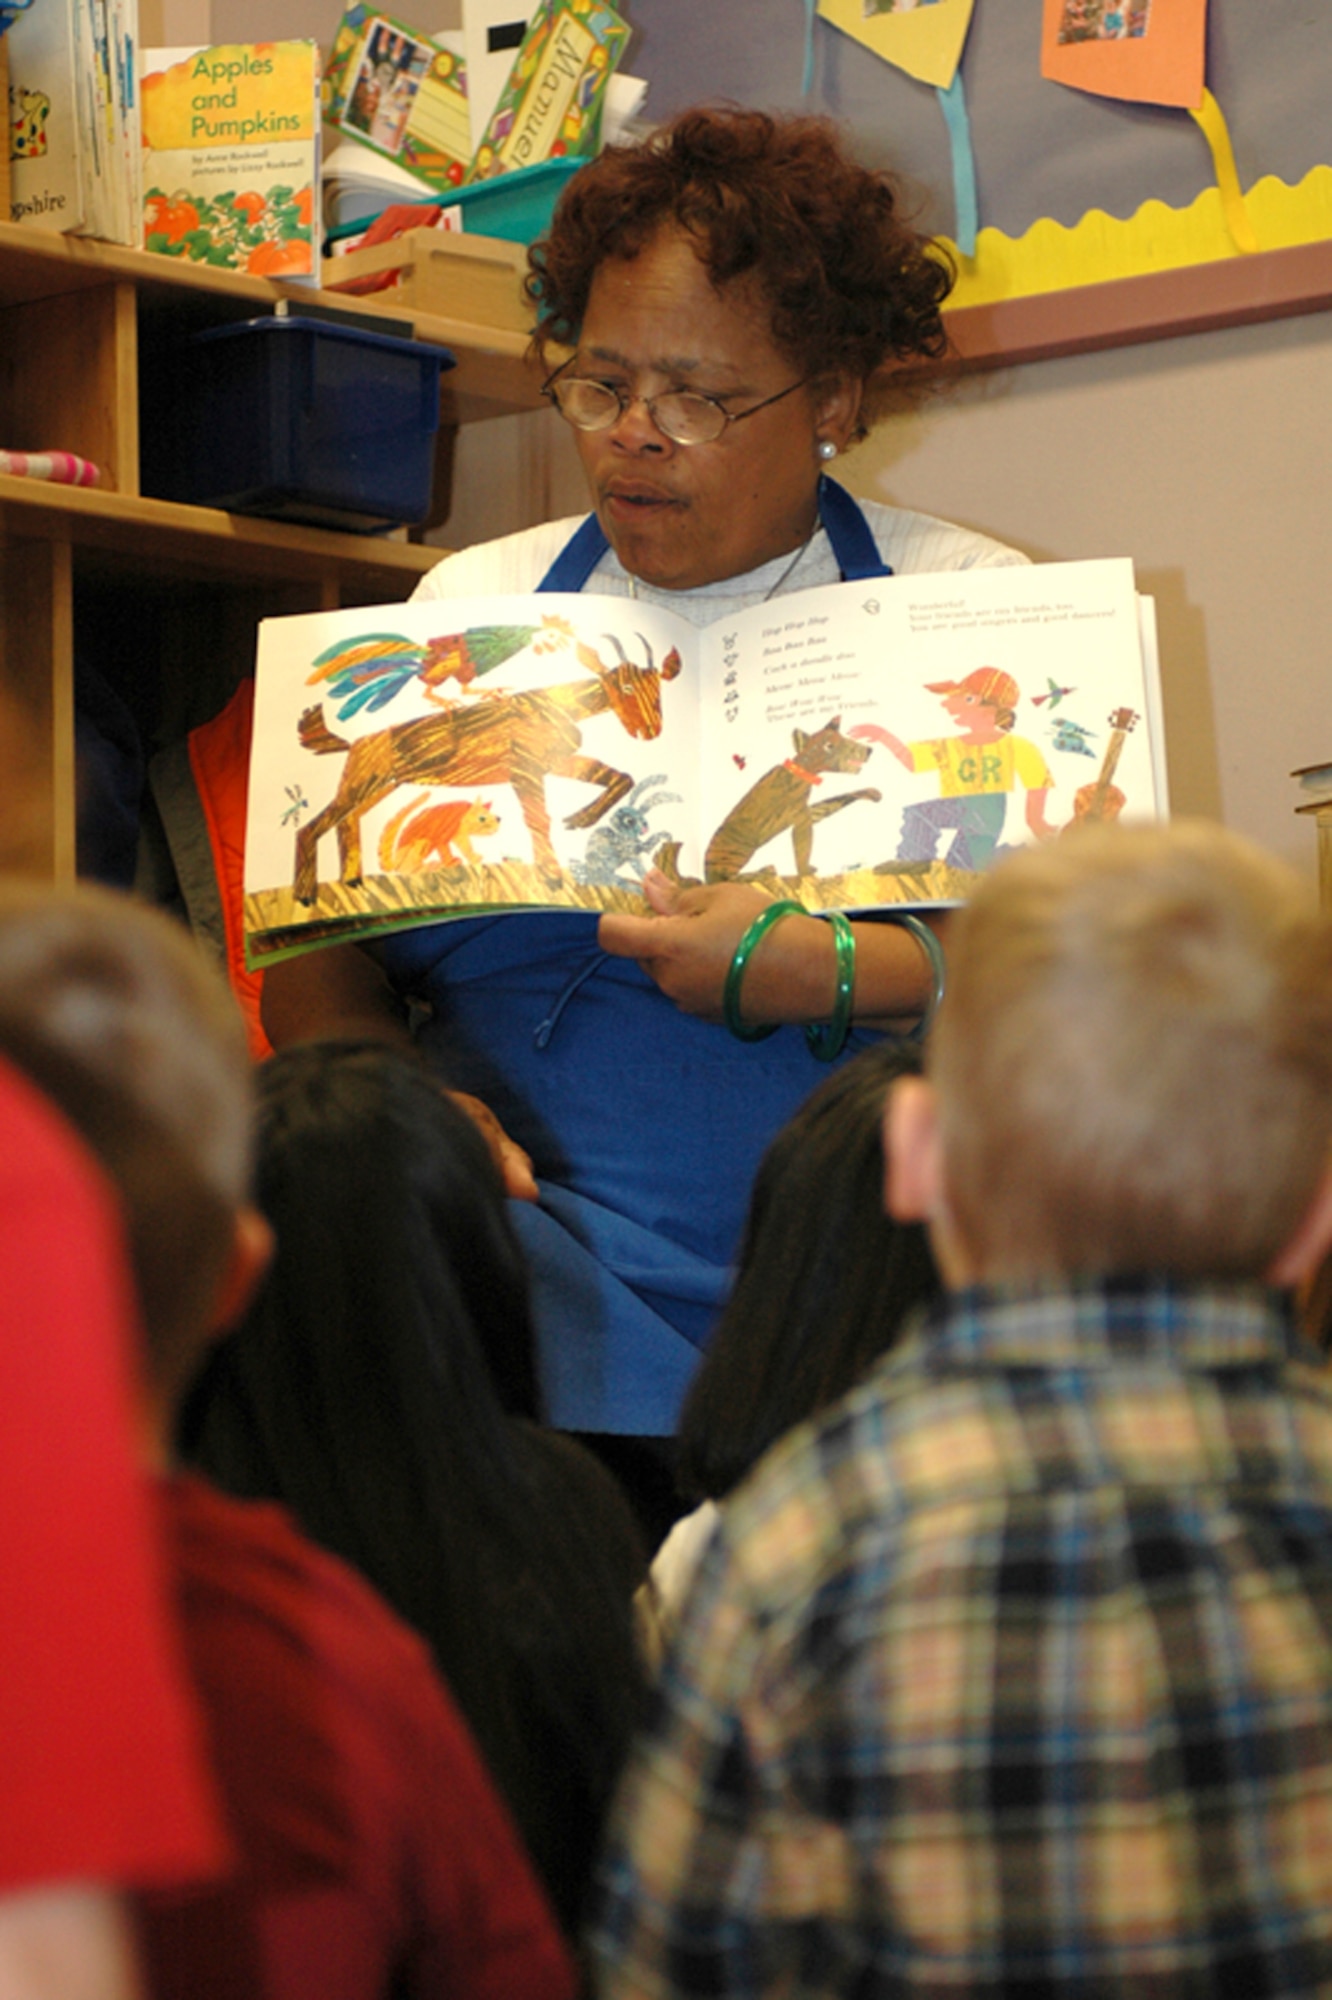 Mrs. Dorothea Wolfe, head teacher of the morning class, reads to the children during storytime. (U.S. Air Force photo by Staff Sgt. Raymond Hoy)